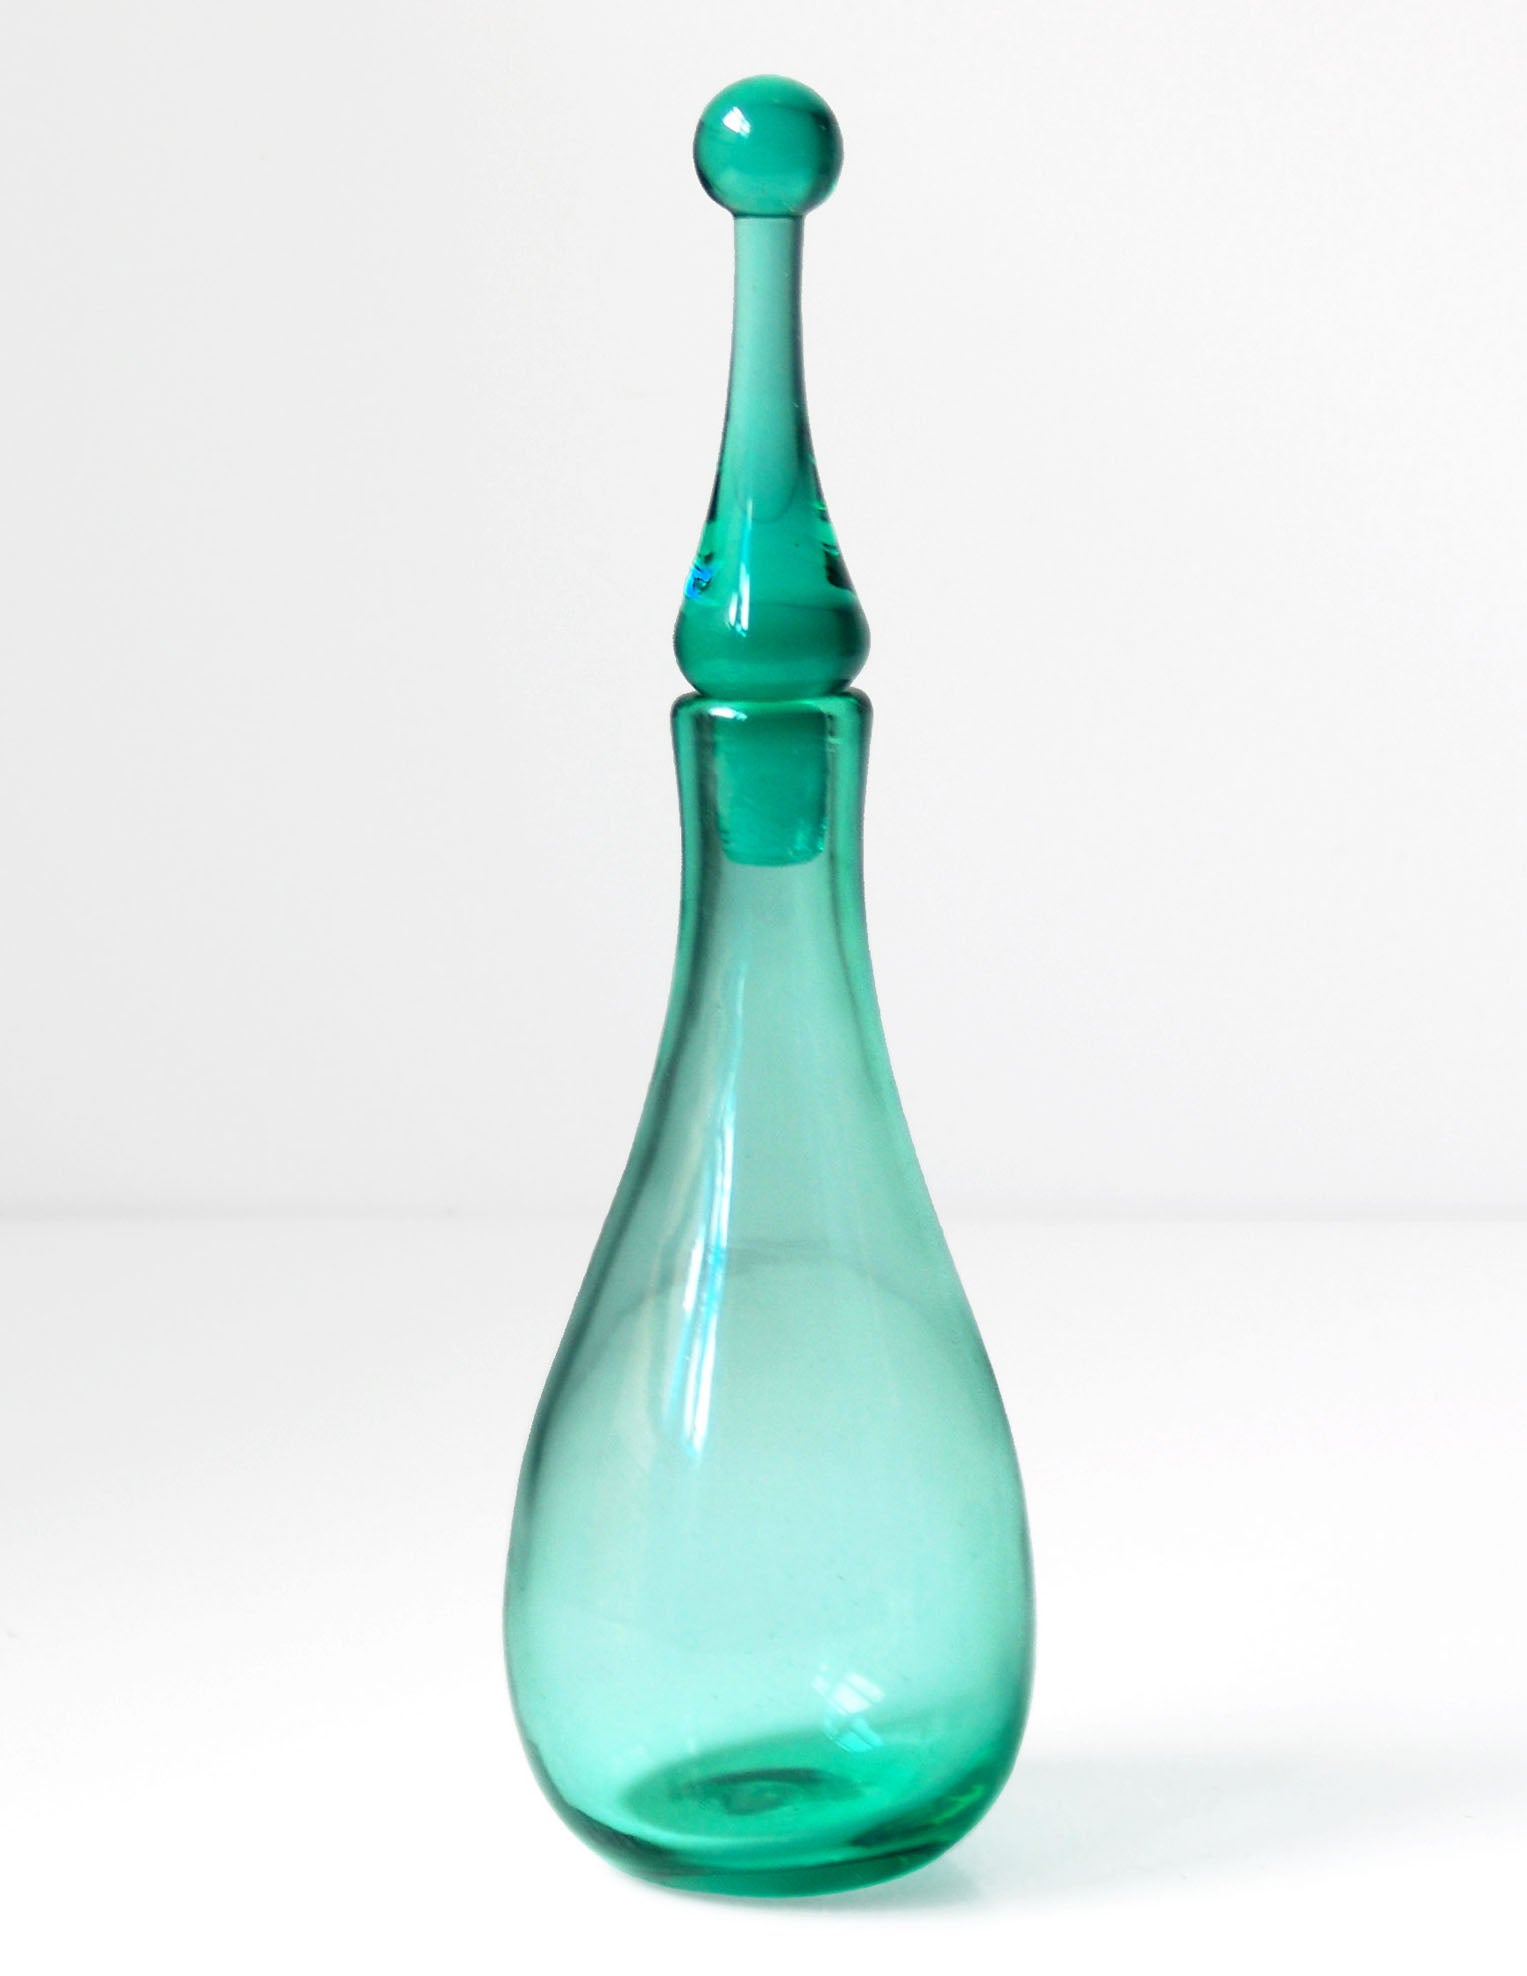 1963 Teardrop Decanter by Wayne Husted for the Blenko Glass Co.